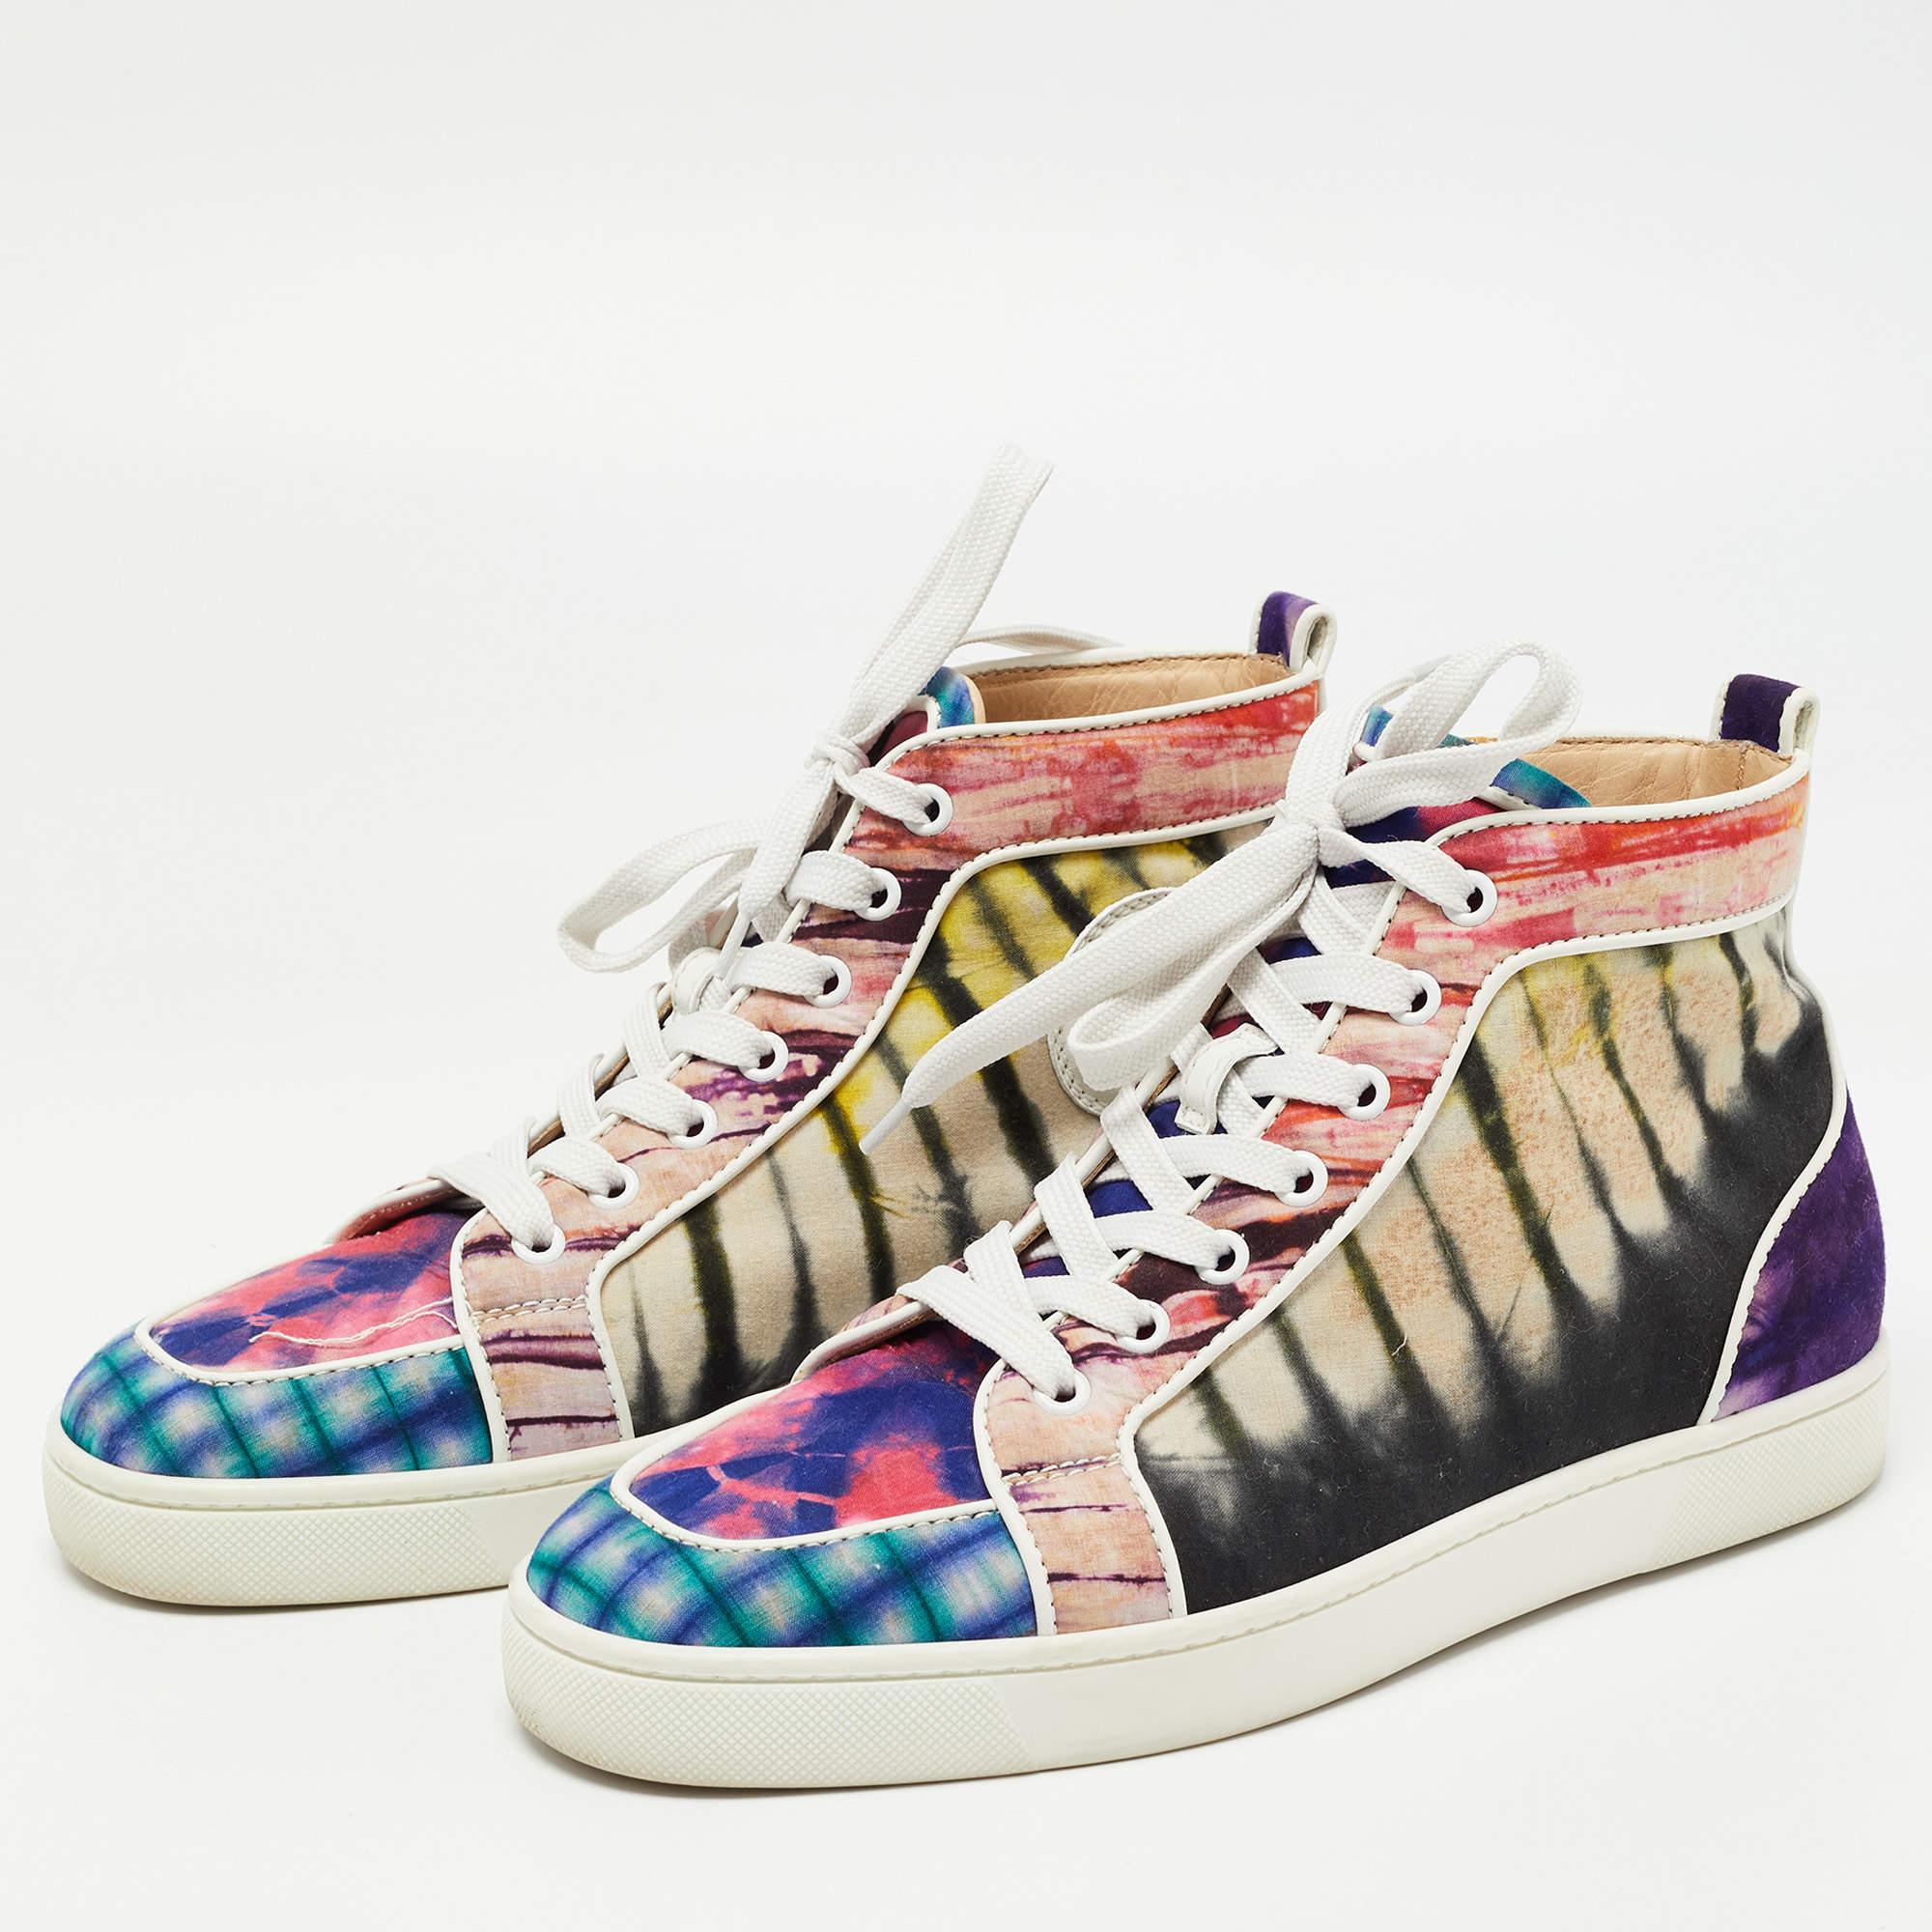 Beige Christian Louboutin Multicolor Fabric Tie Dye High Top Sneakers Size 39.5 For Sale